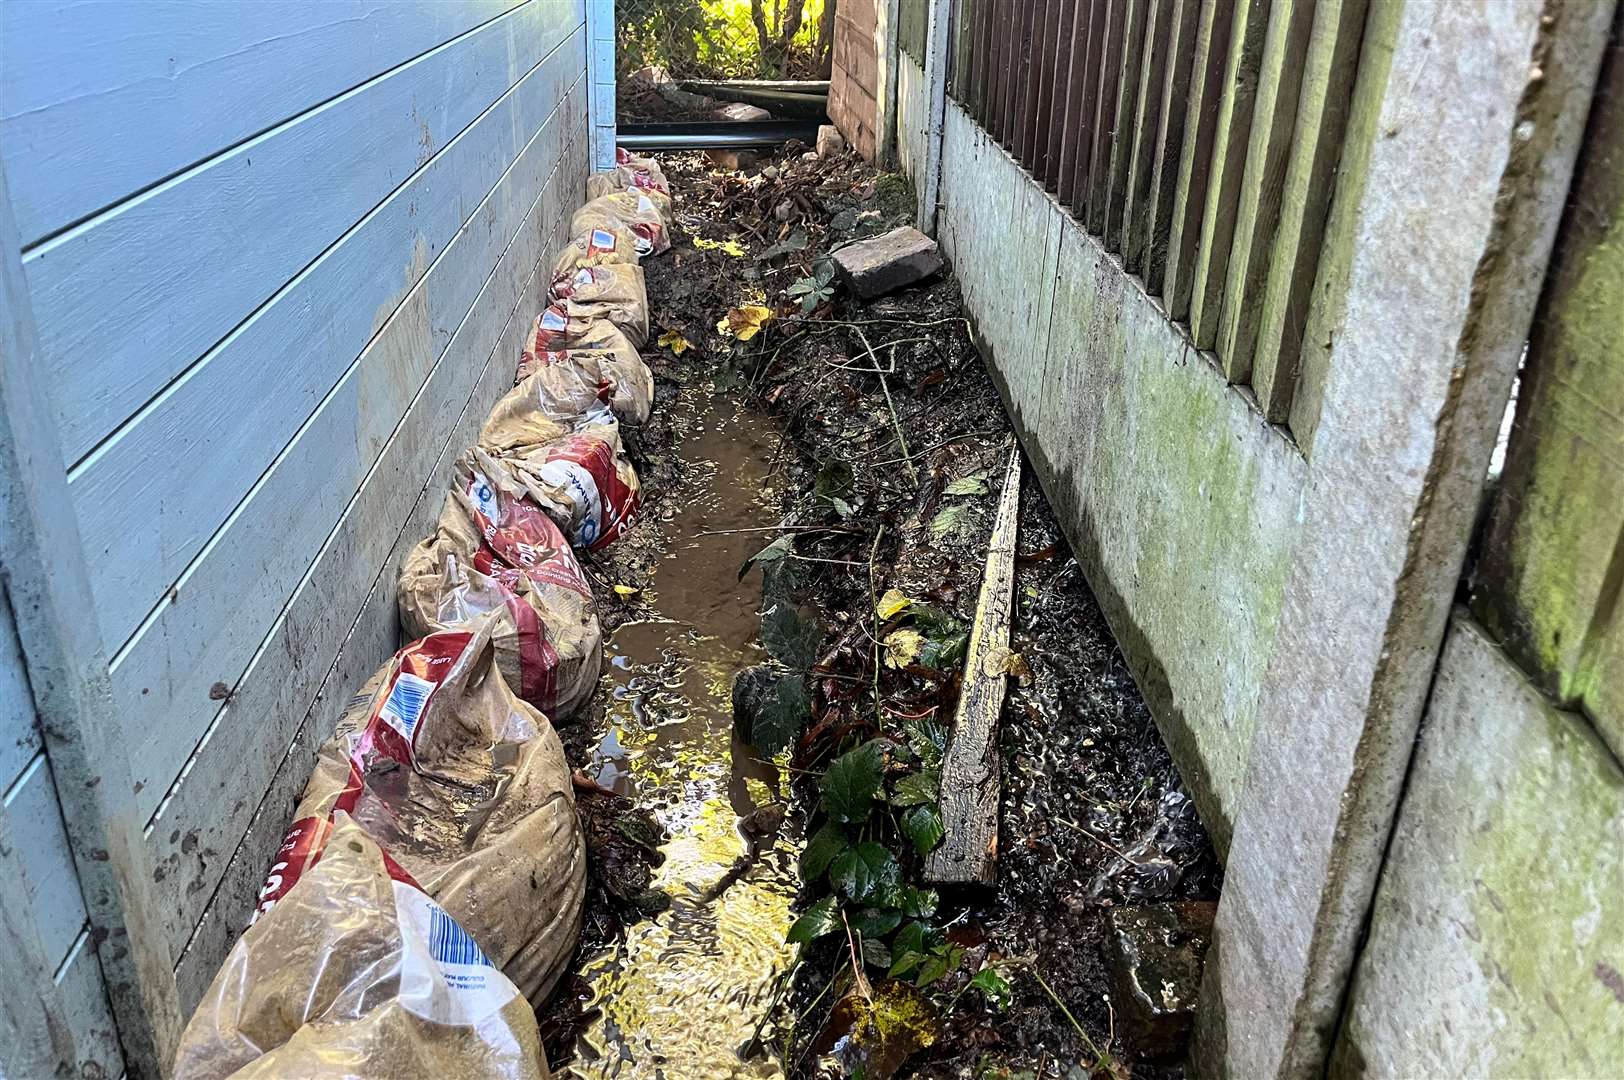 Mrs Chung and her husband Mr Roth have dug trenches and put sandbags around their garden shed